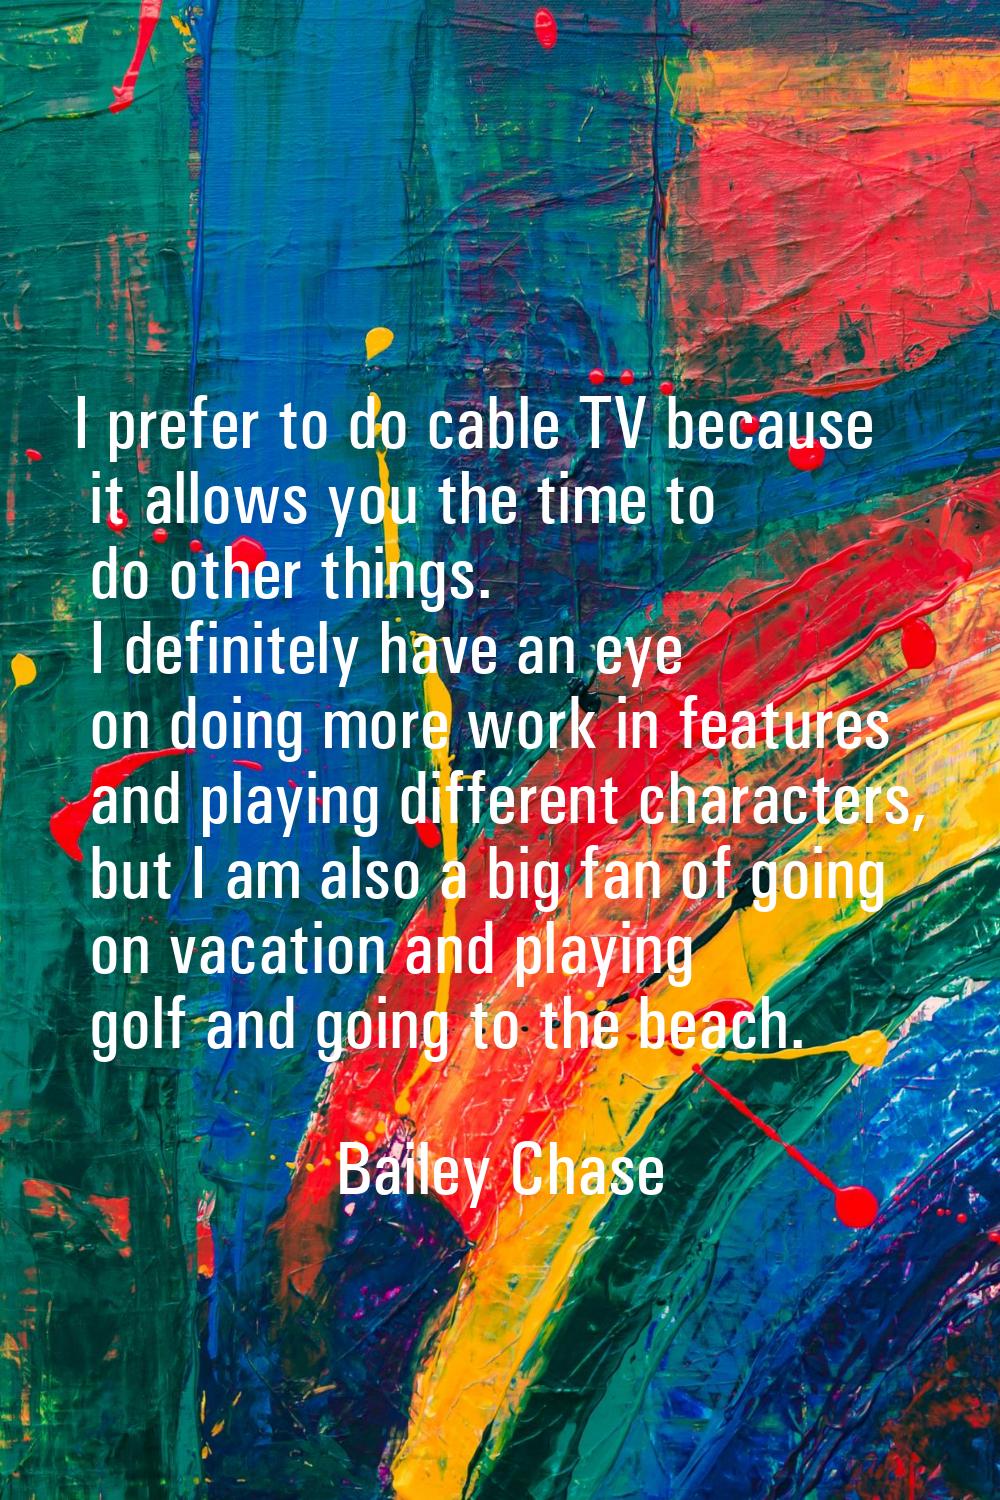 I prefer to do cable TV because it allows you the time to do other things. I definitely have an eye